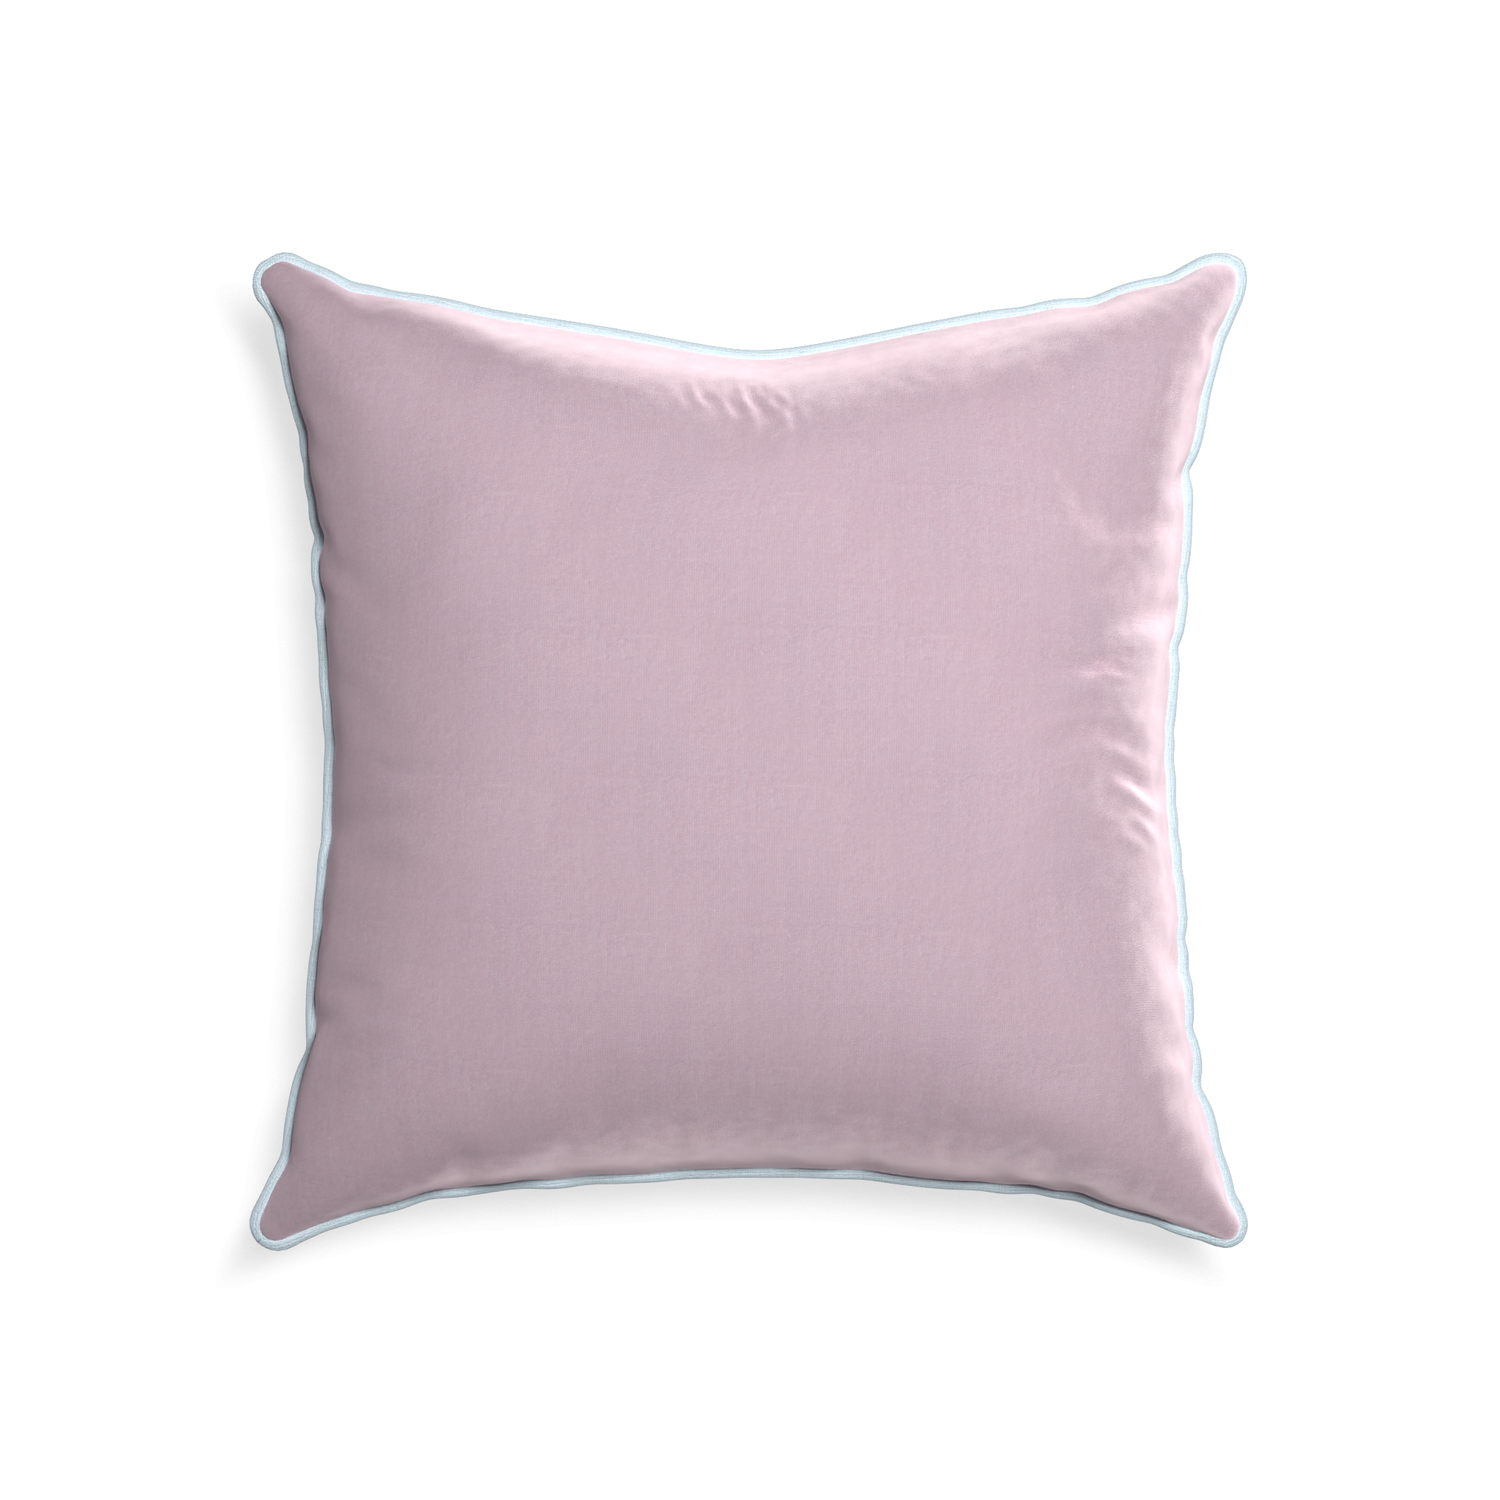 22-square lilac velvet custom pillow with powder piping on white background